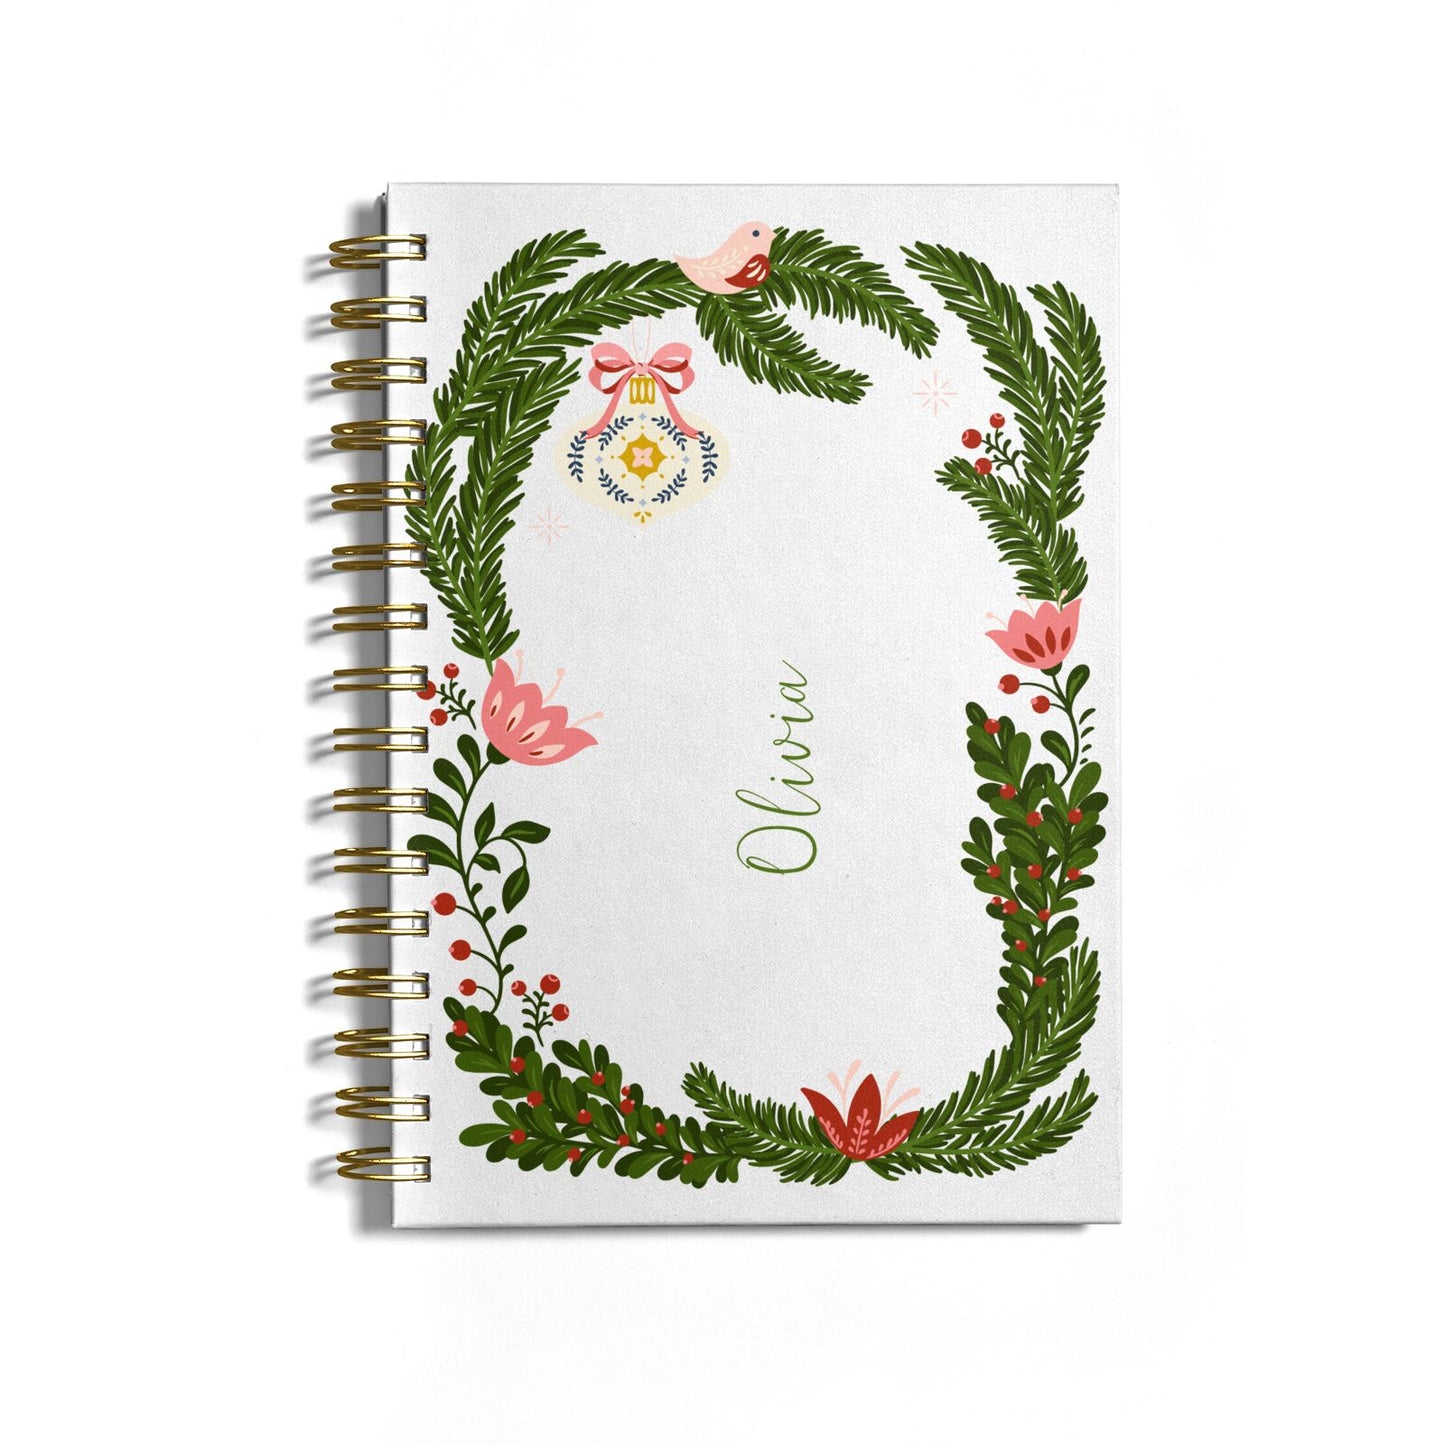 Personalised Vintage Foliage Christmas Notebook with Gold Coil